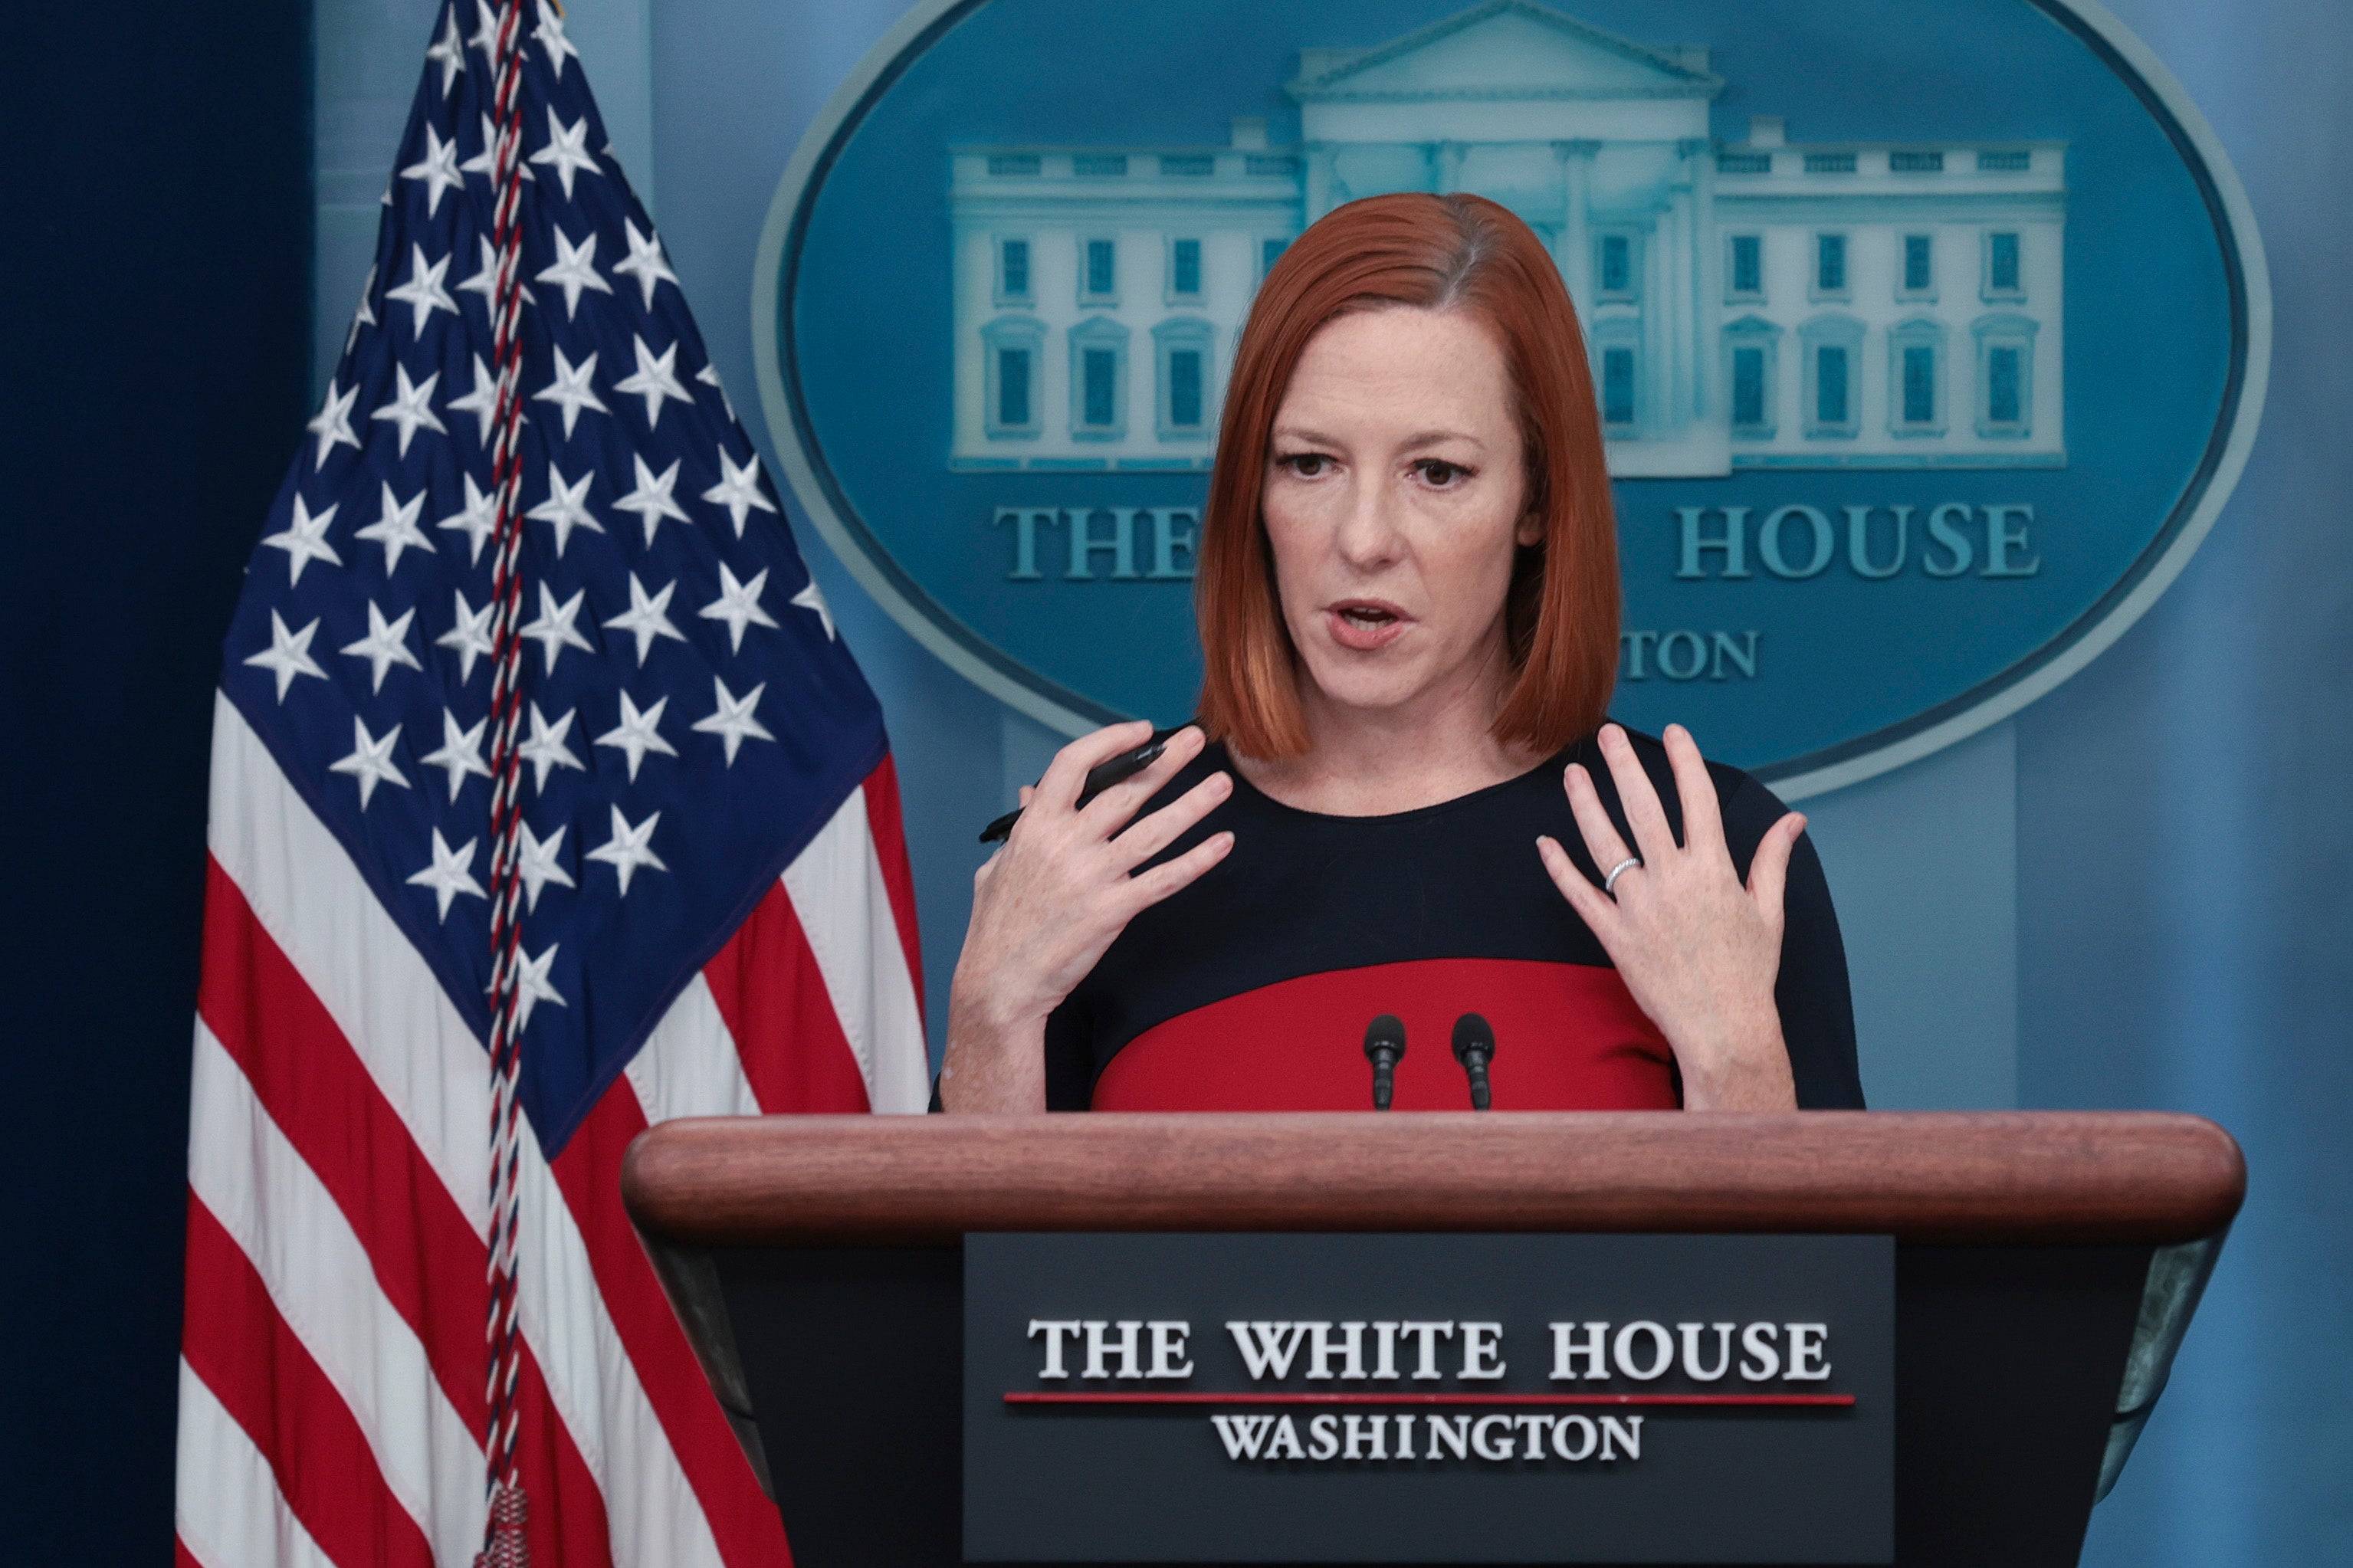 White House press secretary Jen Psaki answers questions during the daily White House briefing on 1 February 2022 in Washington, DC